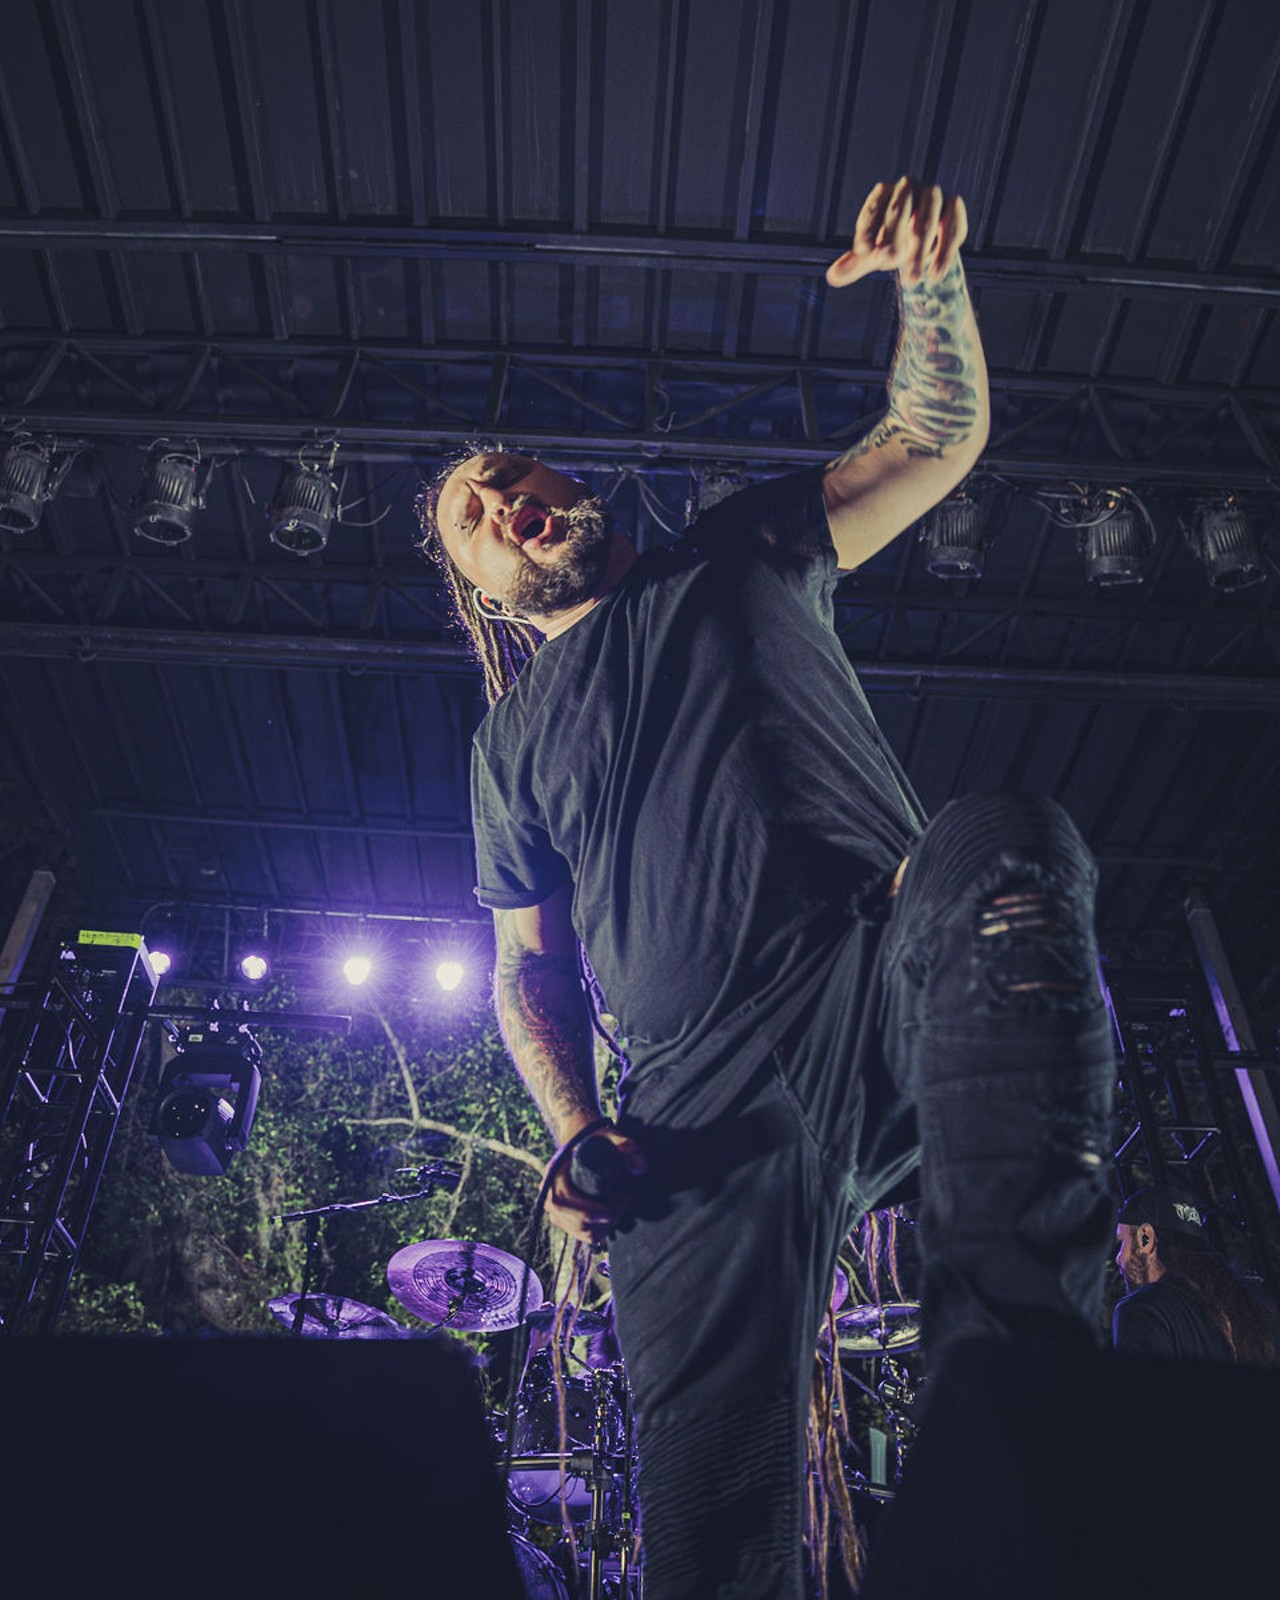 Photos: Decapitated, Septicflesh, and more dominate Tampa's Orpheum